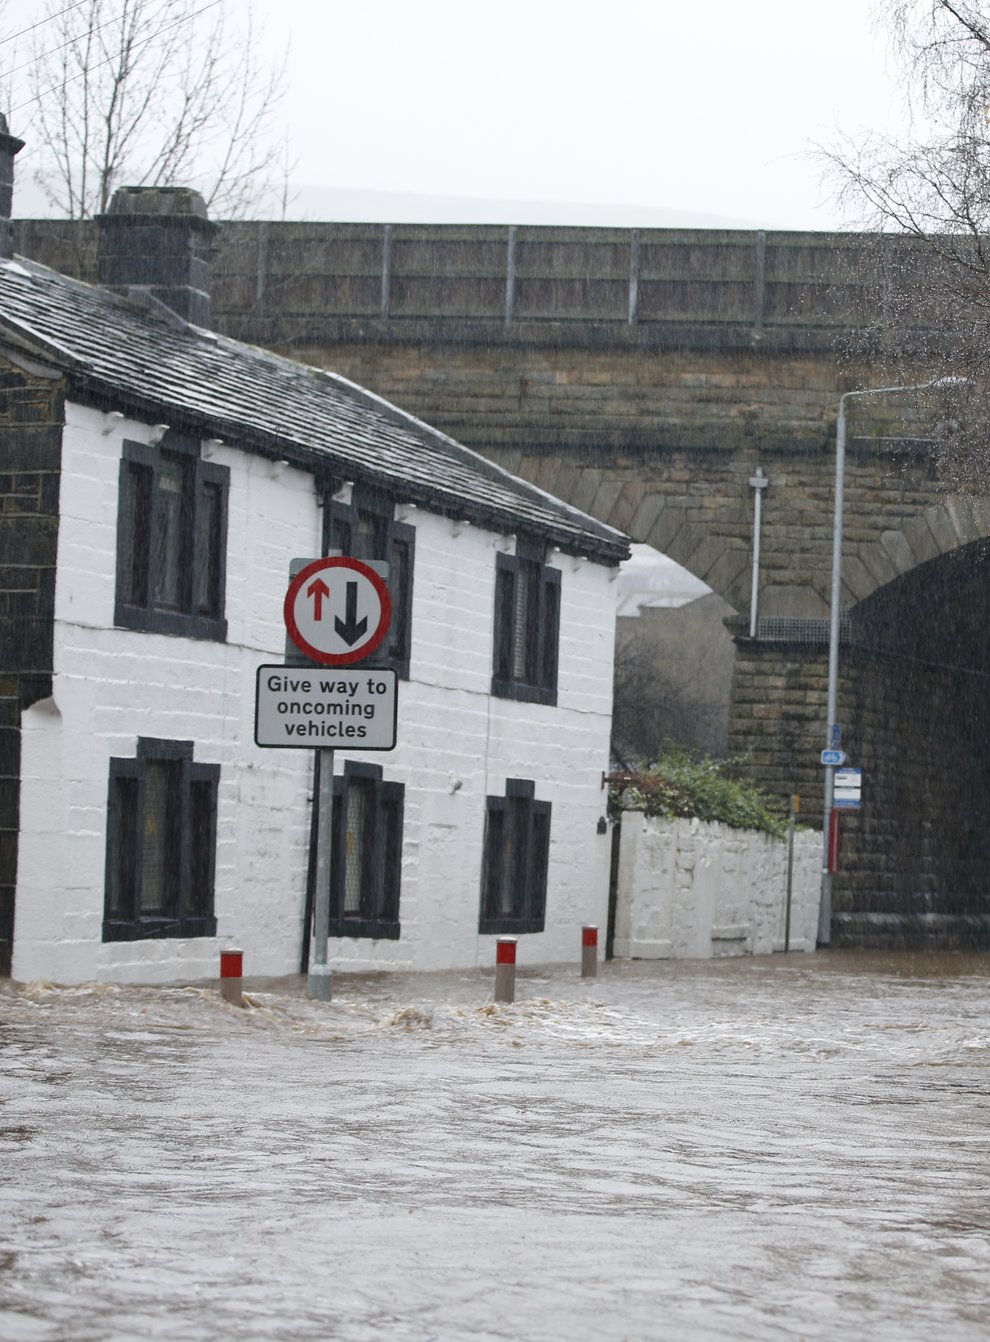 Flooding in Mytholmroyd in Calderdale, West Yorkshire, on Boxing Day 2015